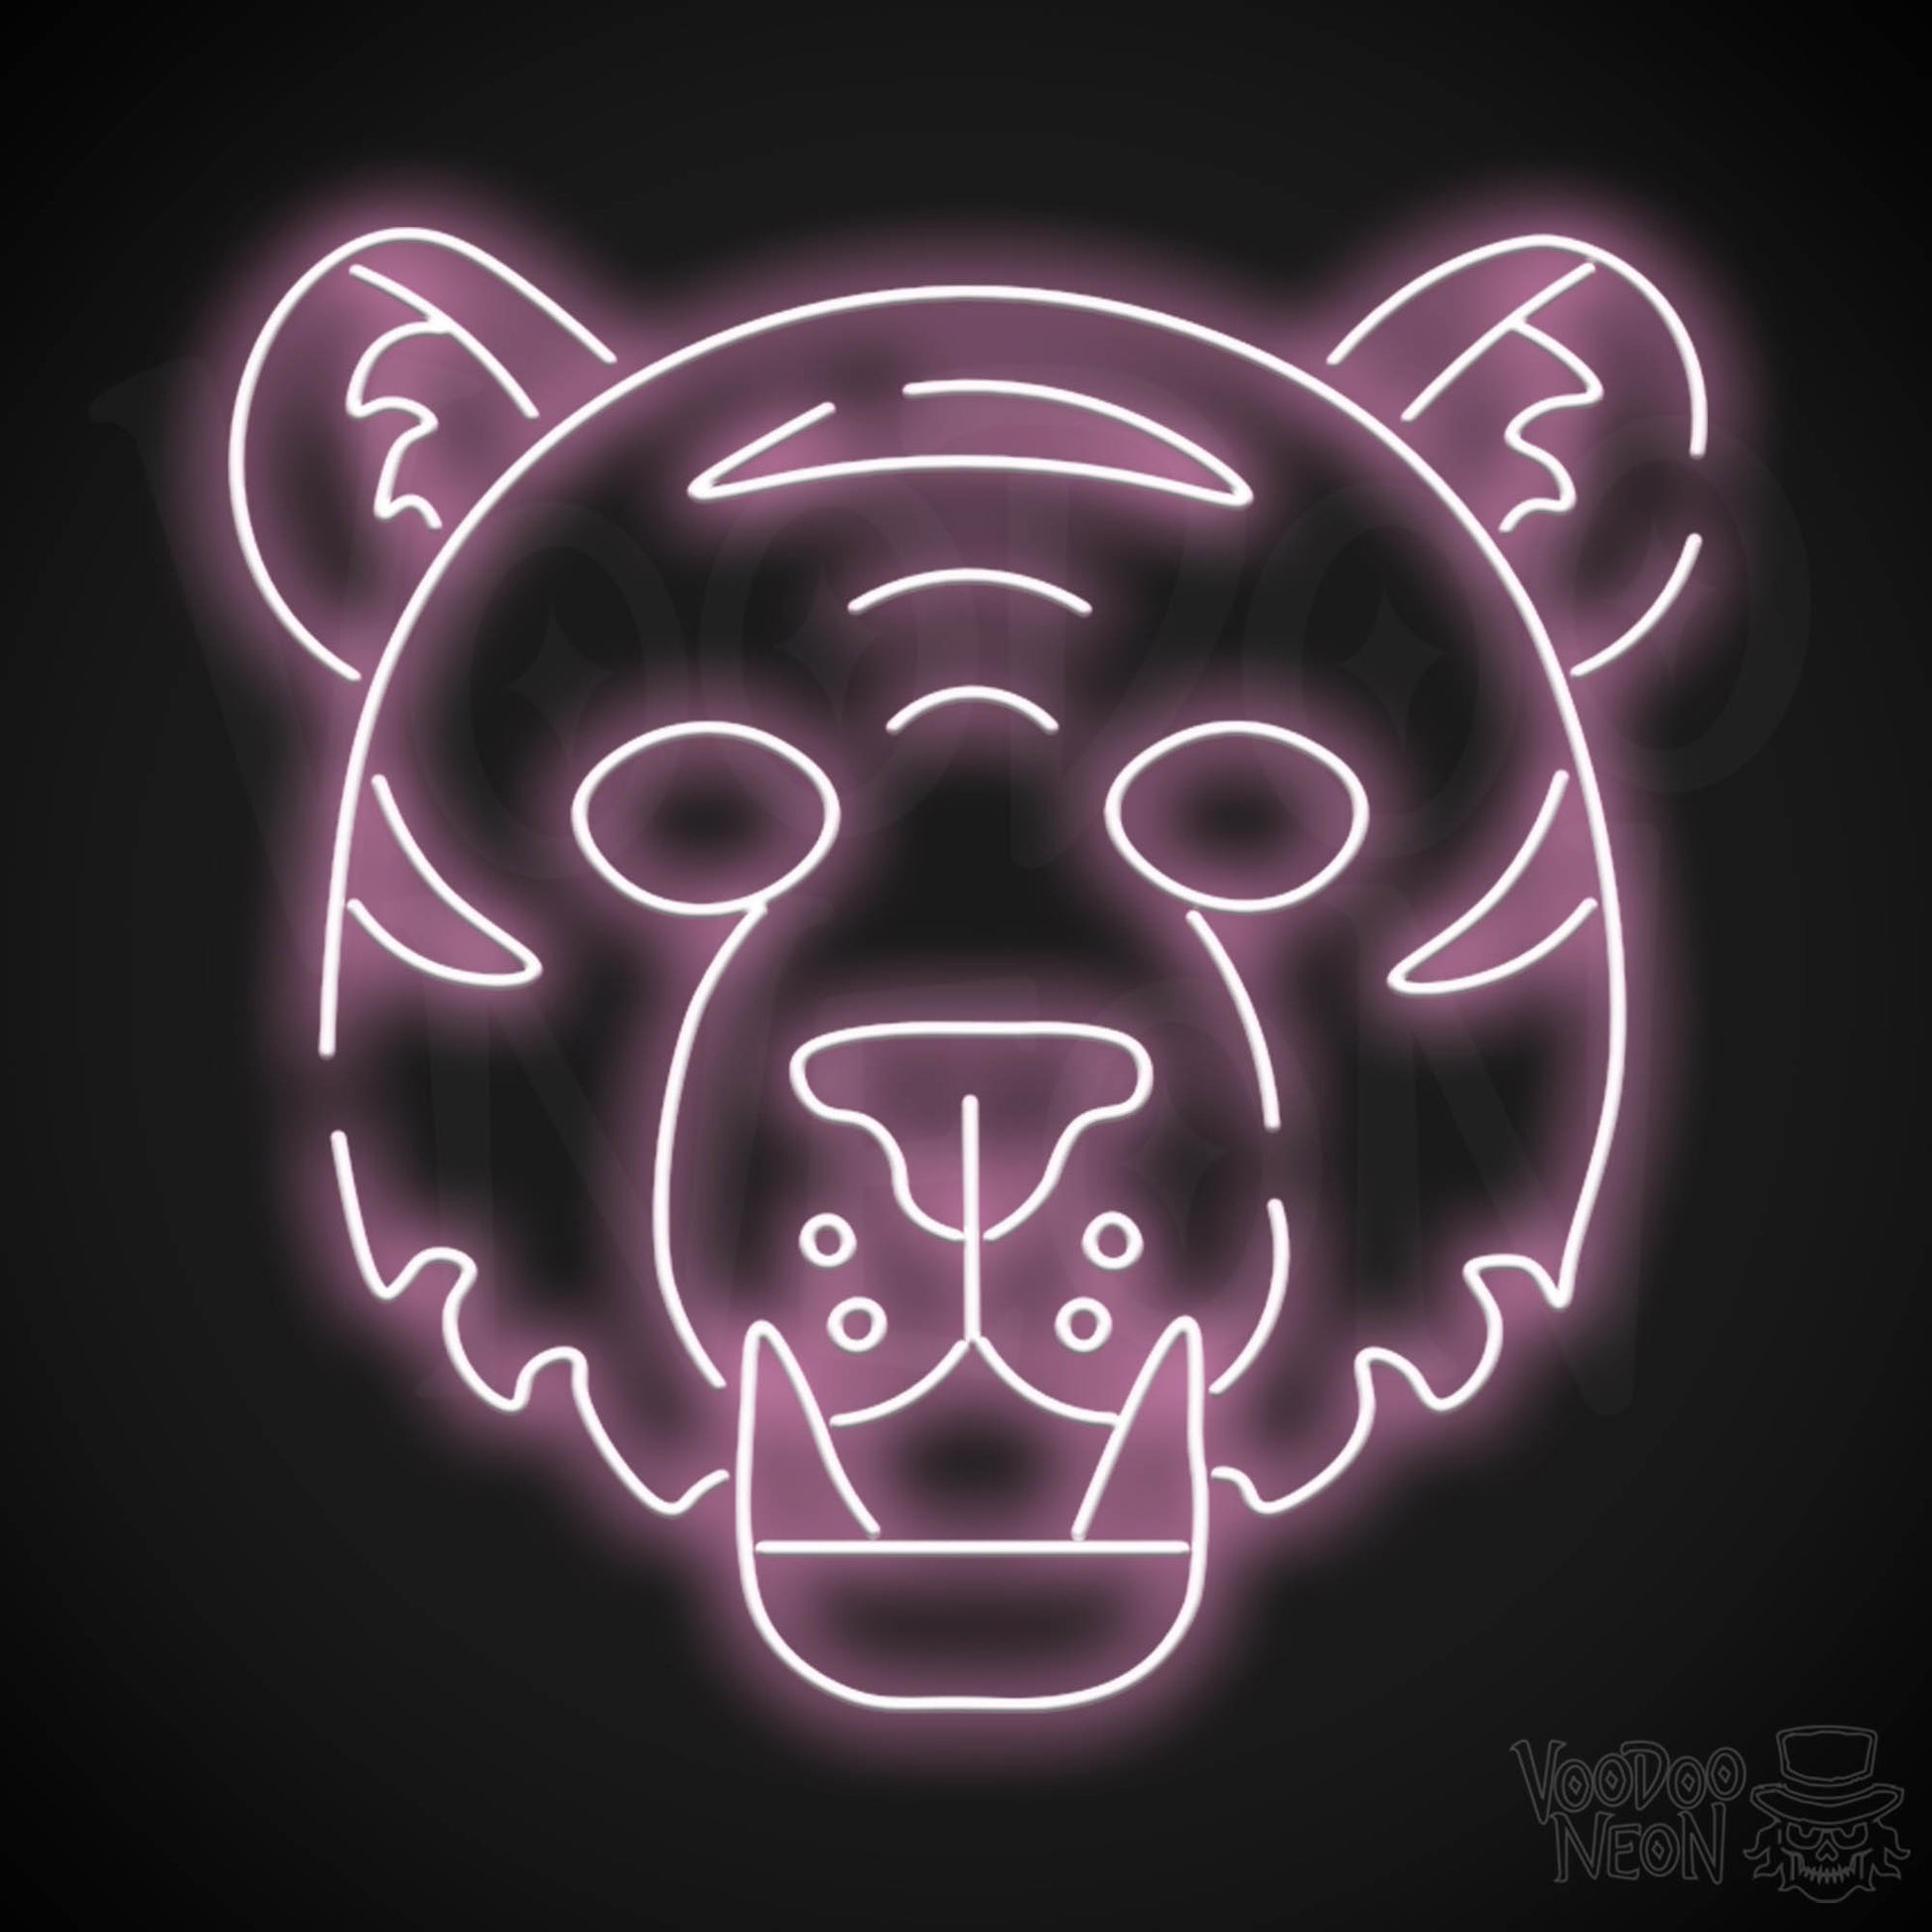 Neon Tiger Wall Art - Neon Tiger Sign - Tiger Neon Sign - LED Sign - Color Light Pink